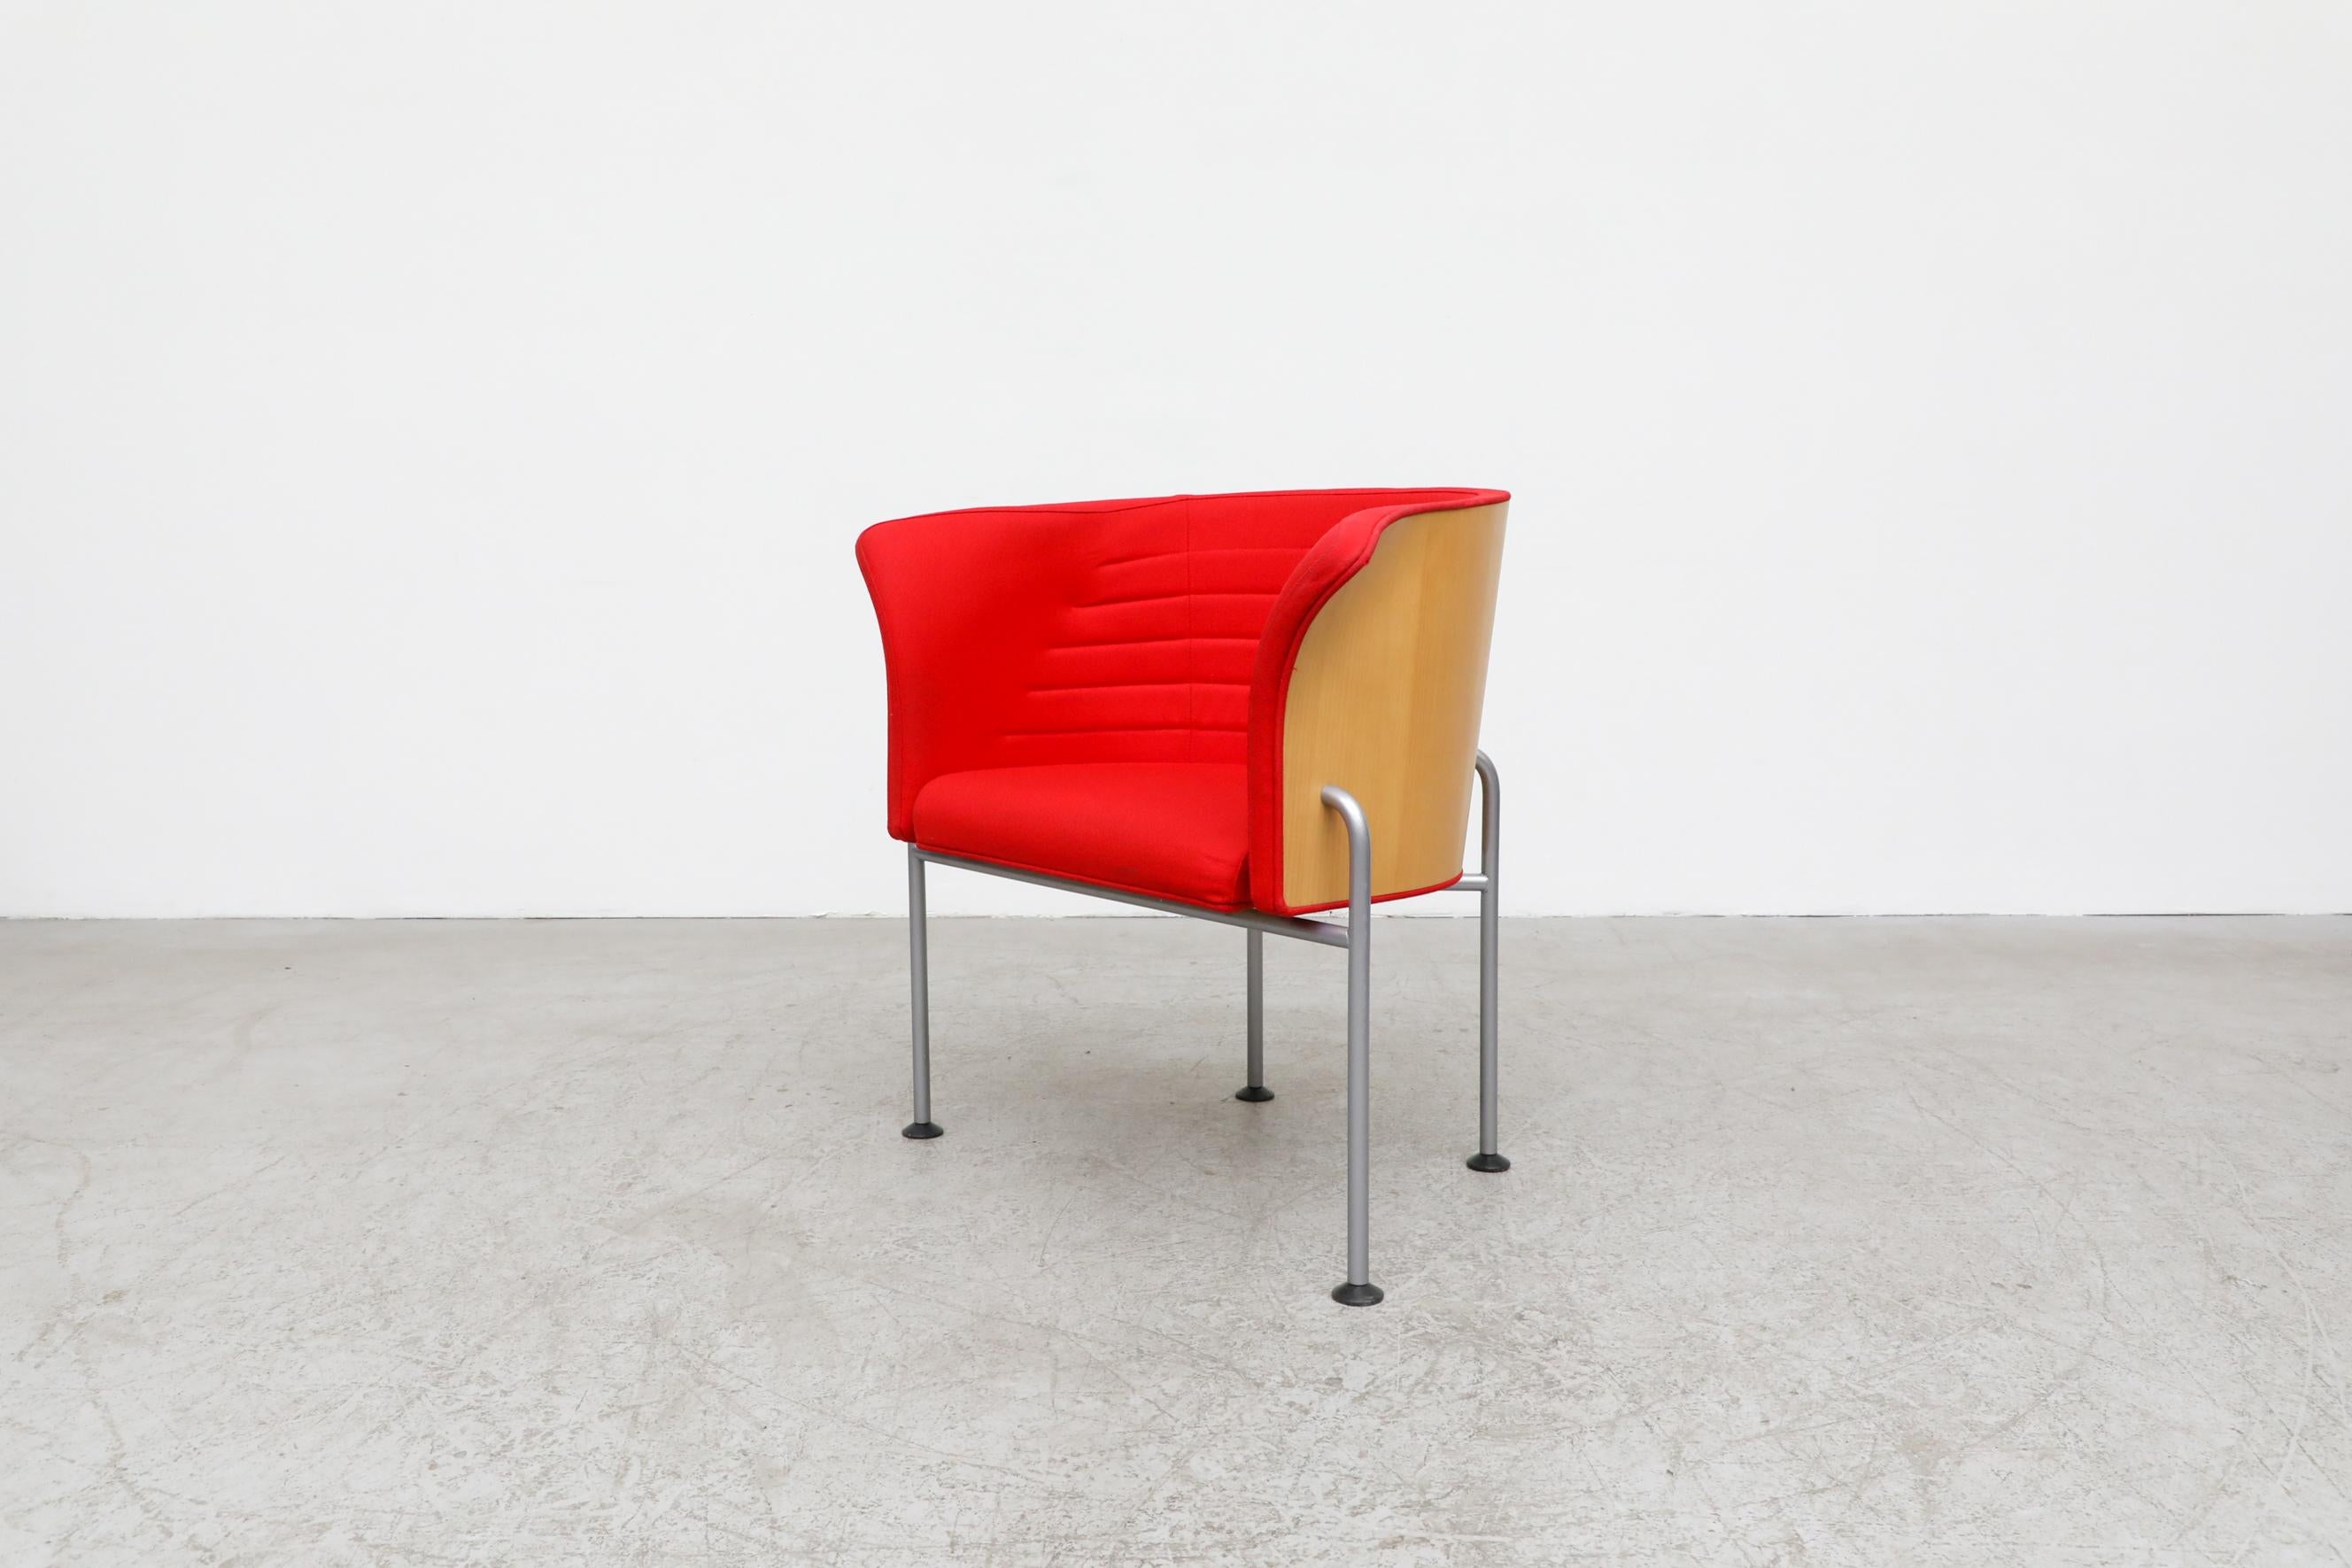 1990's Modernist Magnus Olesen Lotus Chair by Rud Thygensen & Jonny Sørensen. Red upholstered seating with a vacuum molded white ash wood body, upholstered seating and metal legs. In original condition with wear consistent with its age and use.